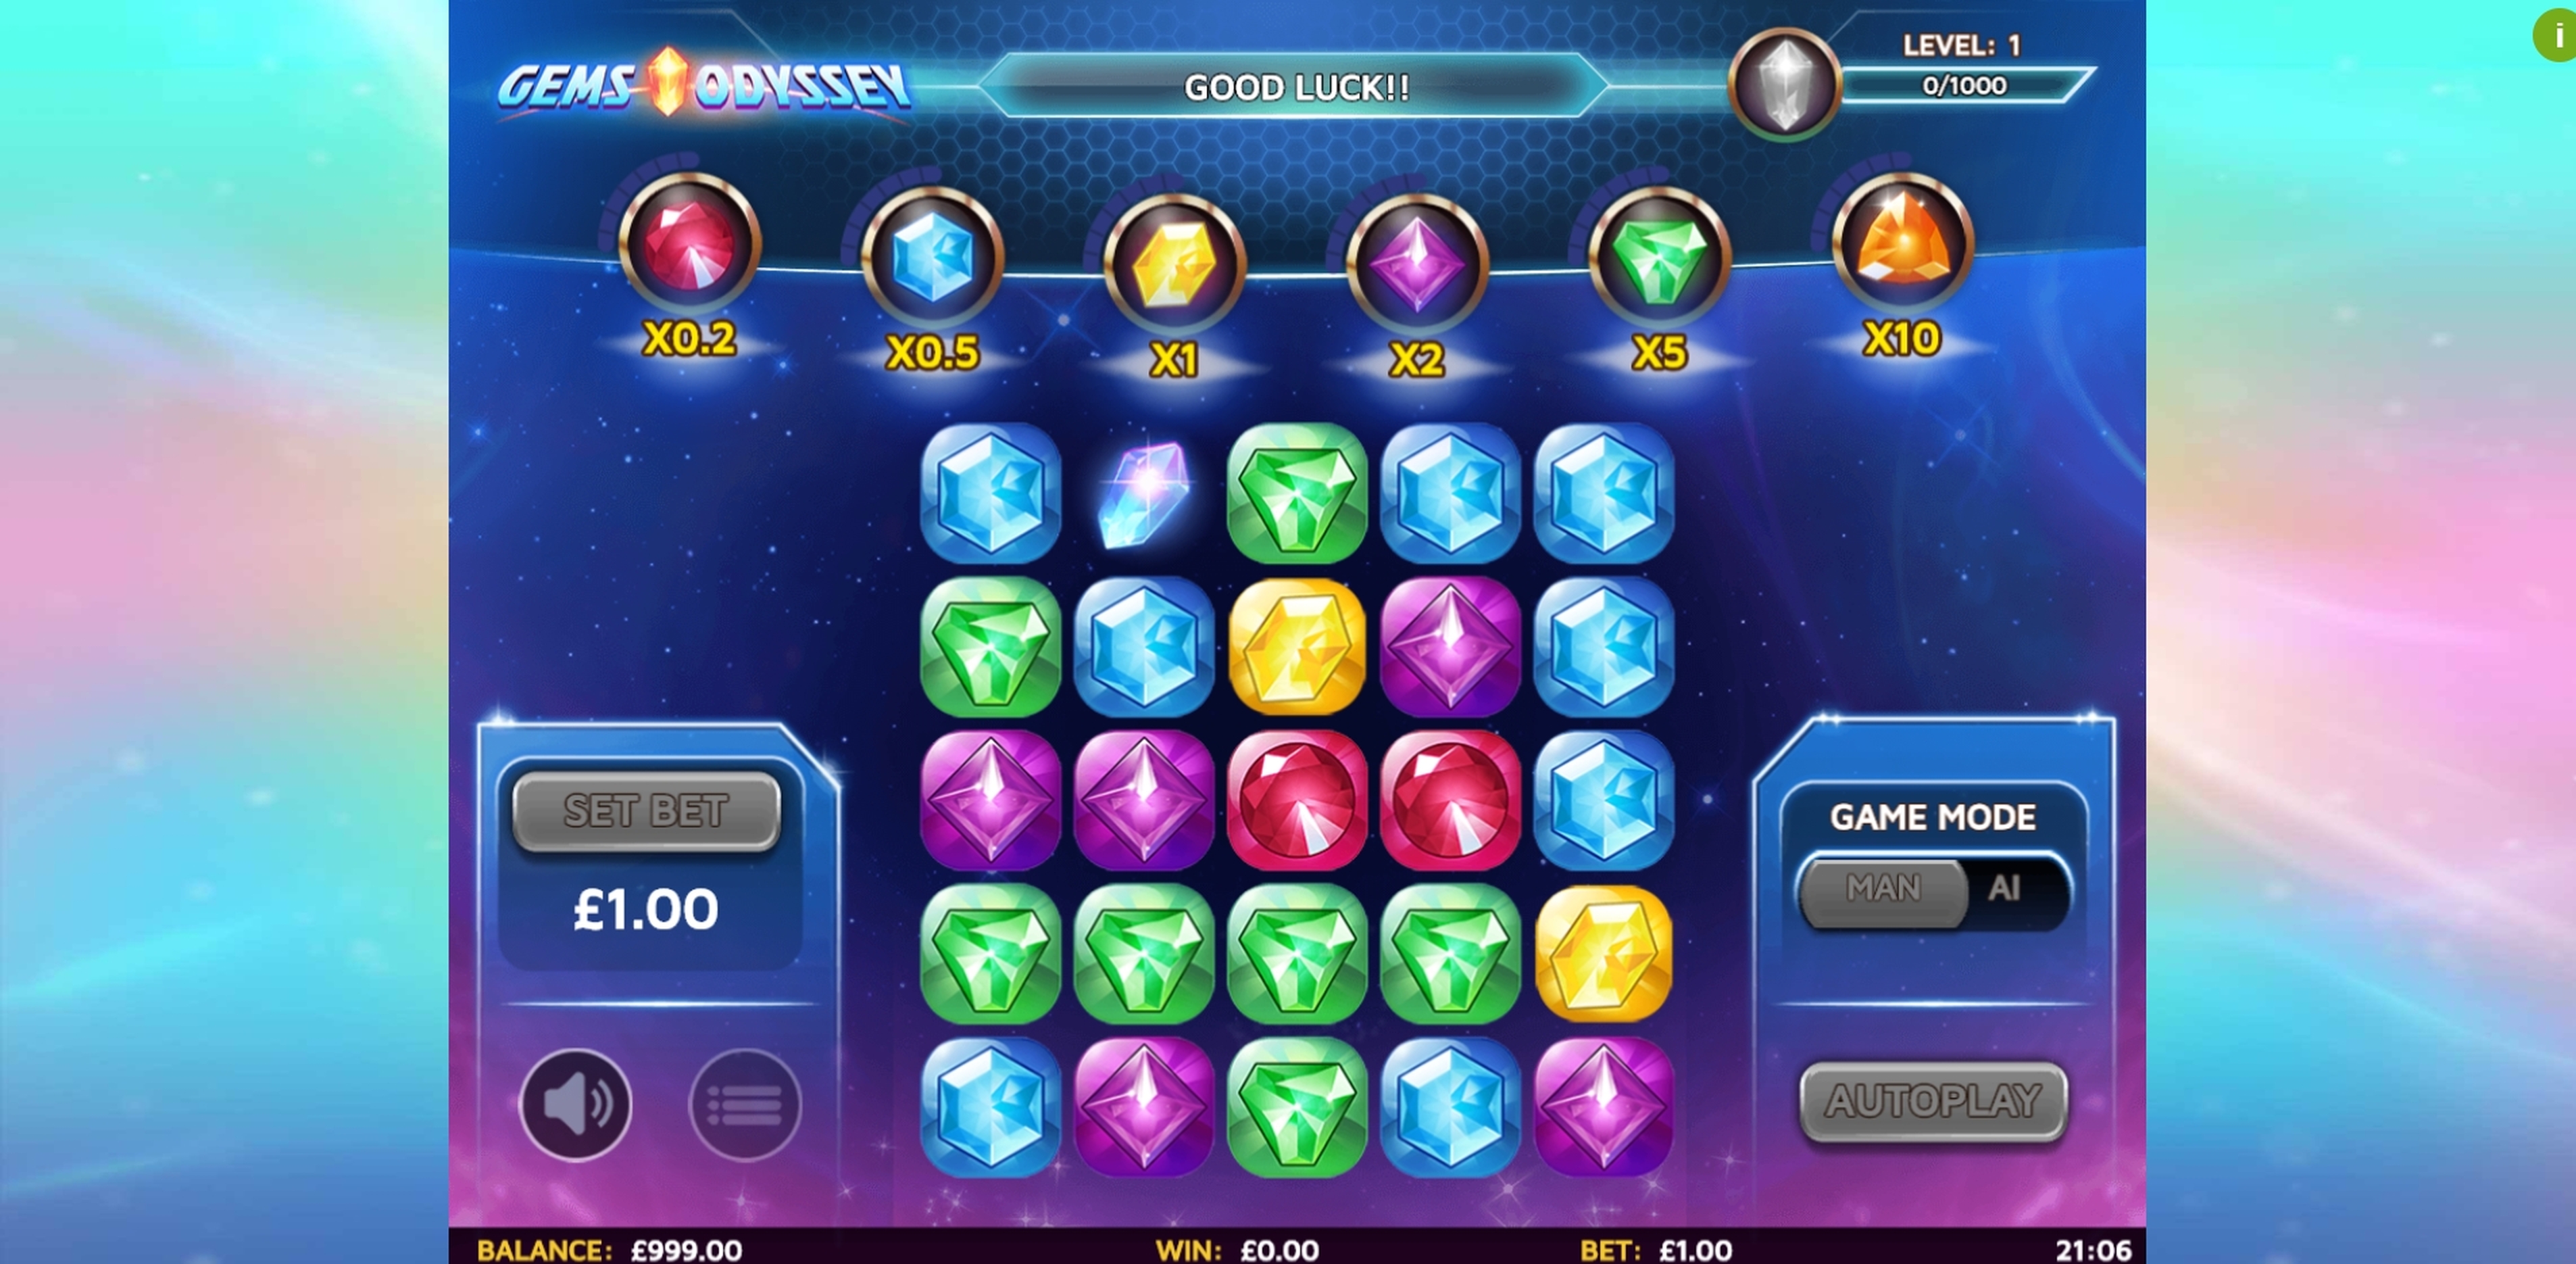 Reels in Gems Odyssey Slot Game by Skillzzgaming